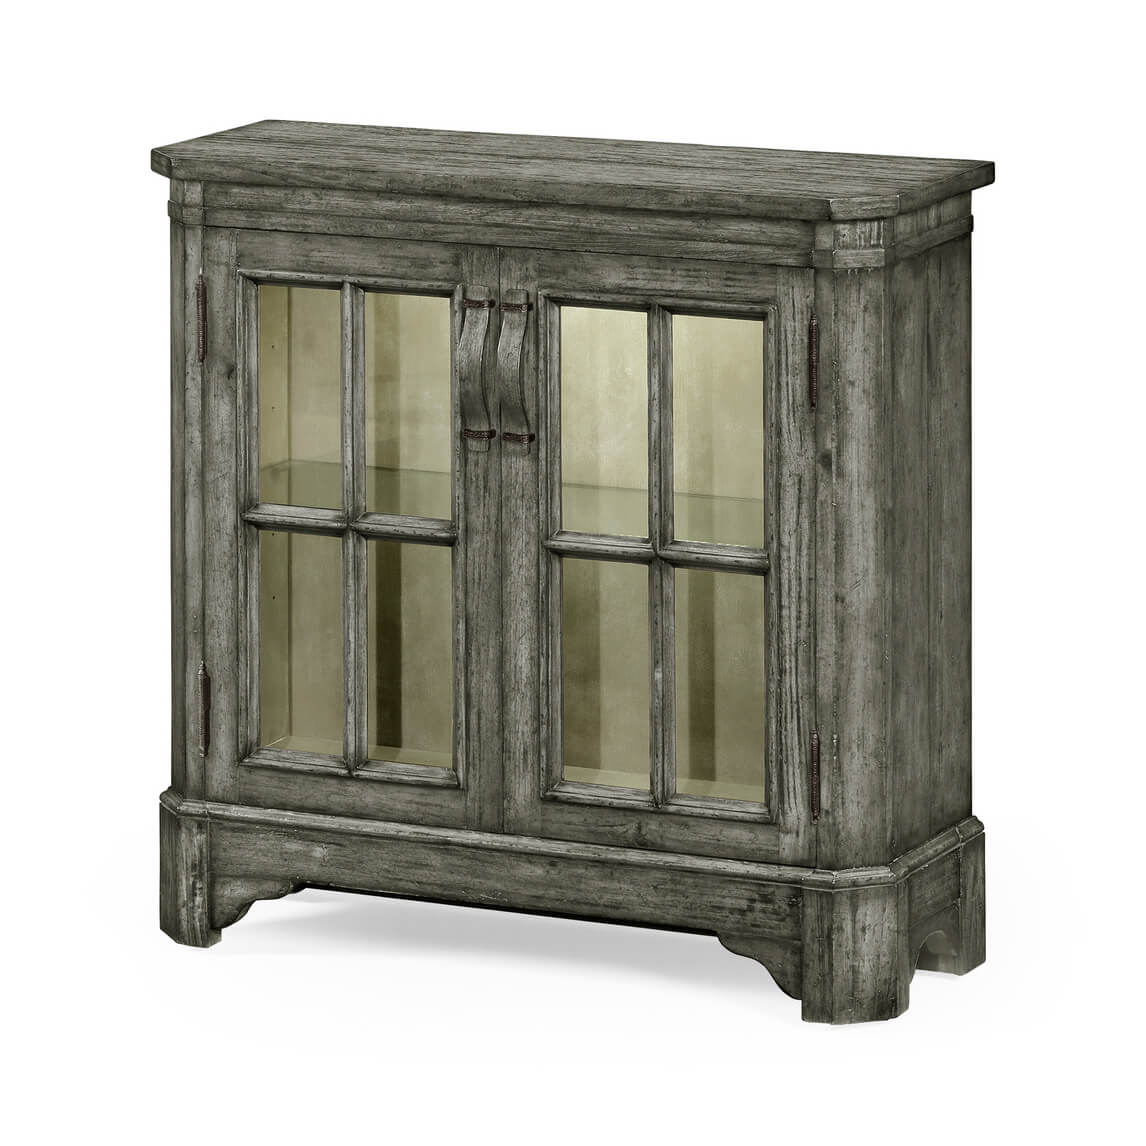 Antiqued Grey Country Low Bookcase - English Georgian America